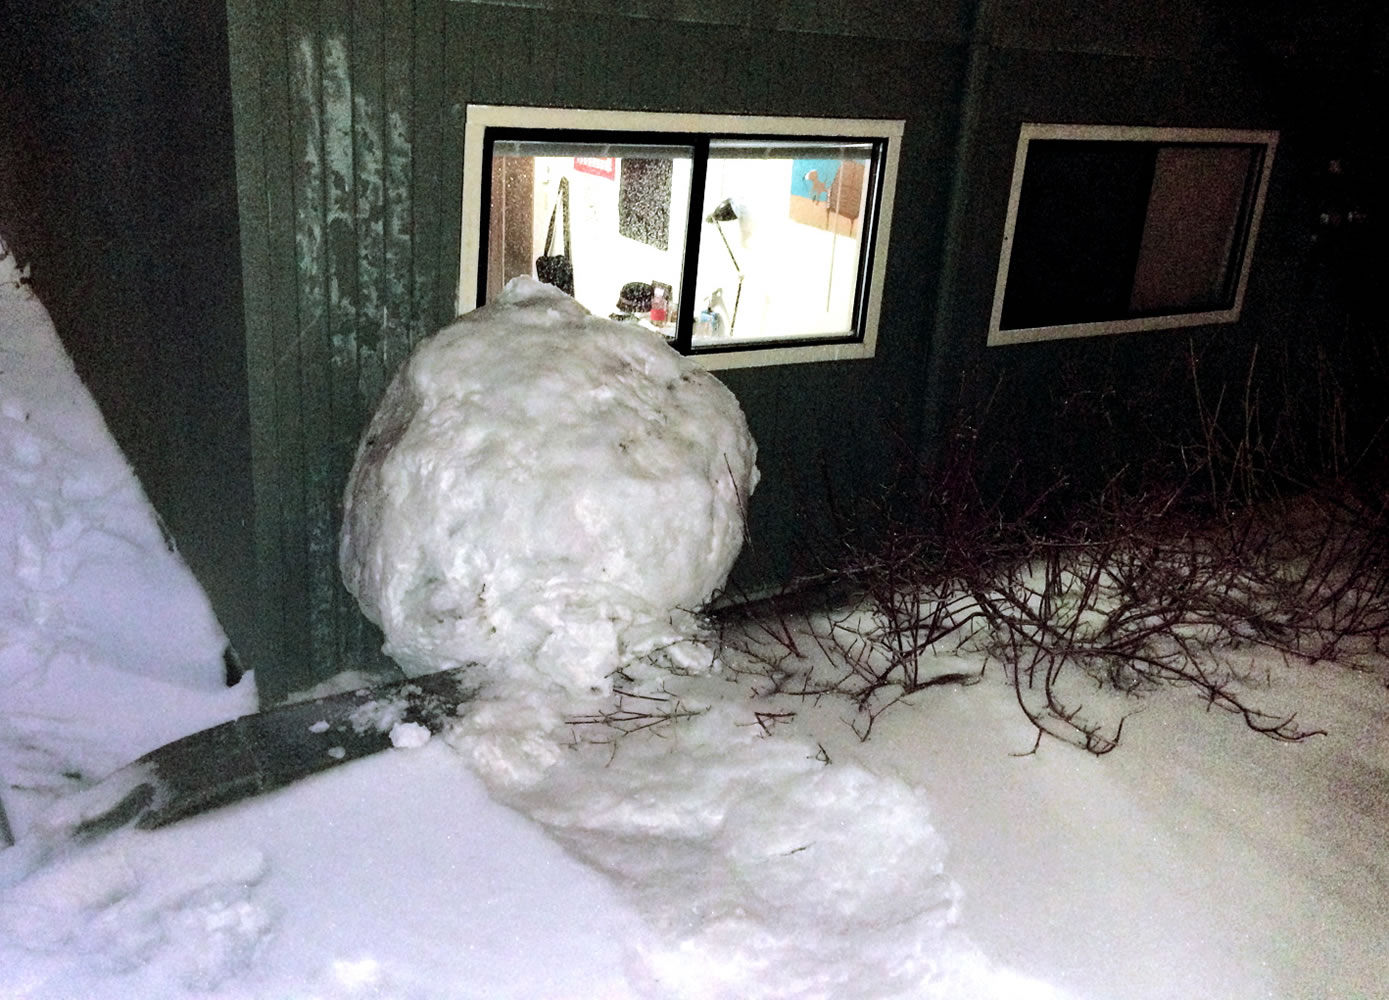 A large snowball that crashed into a Grove Quad dormitory Saturday at Reed College in Portland. The crash ripped a wall off its studs and narrowly missed a window. No one was injured in the collision.